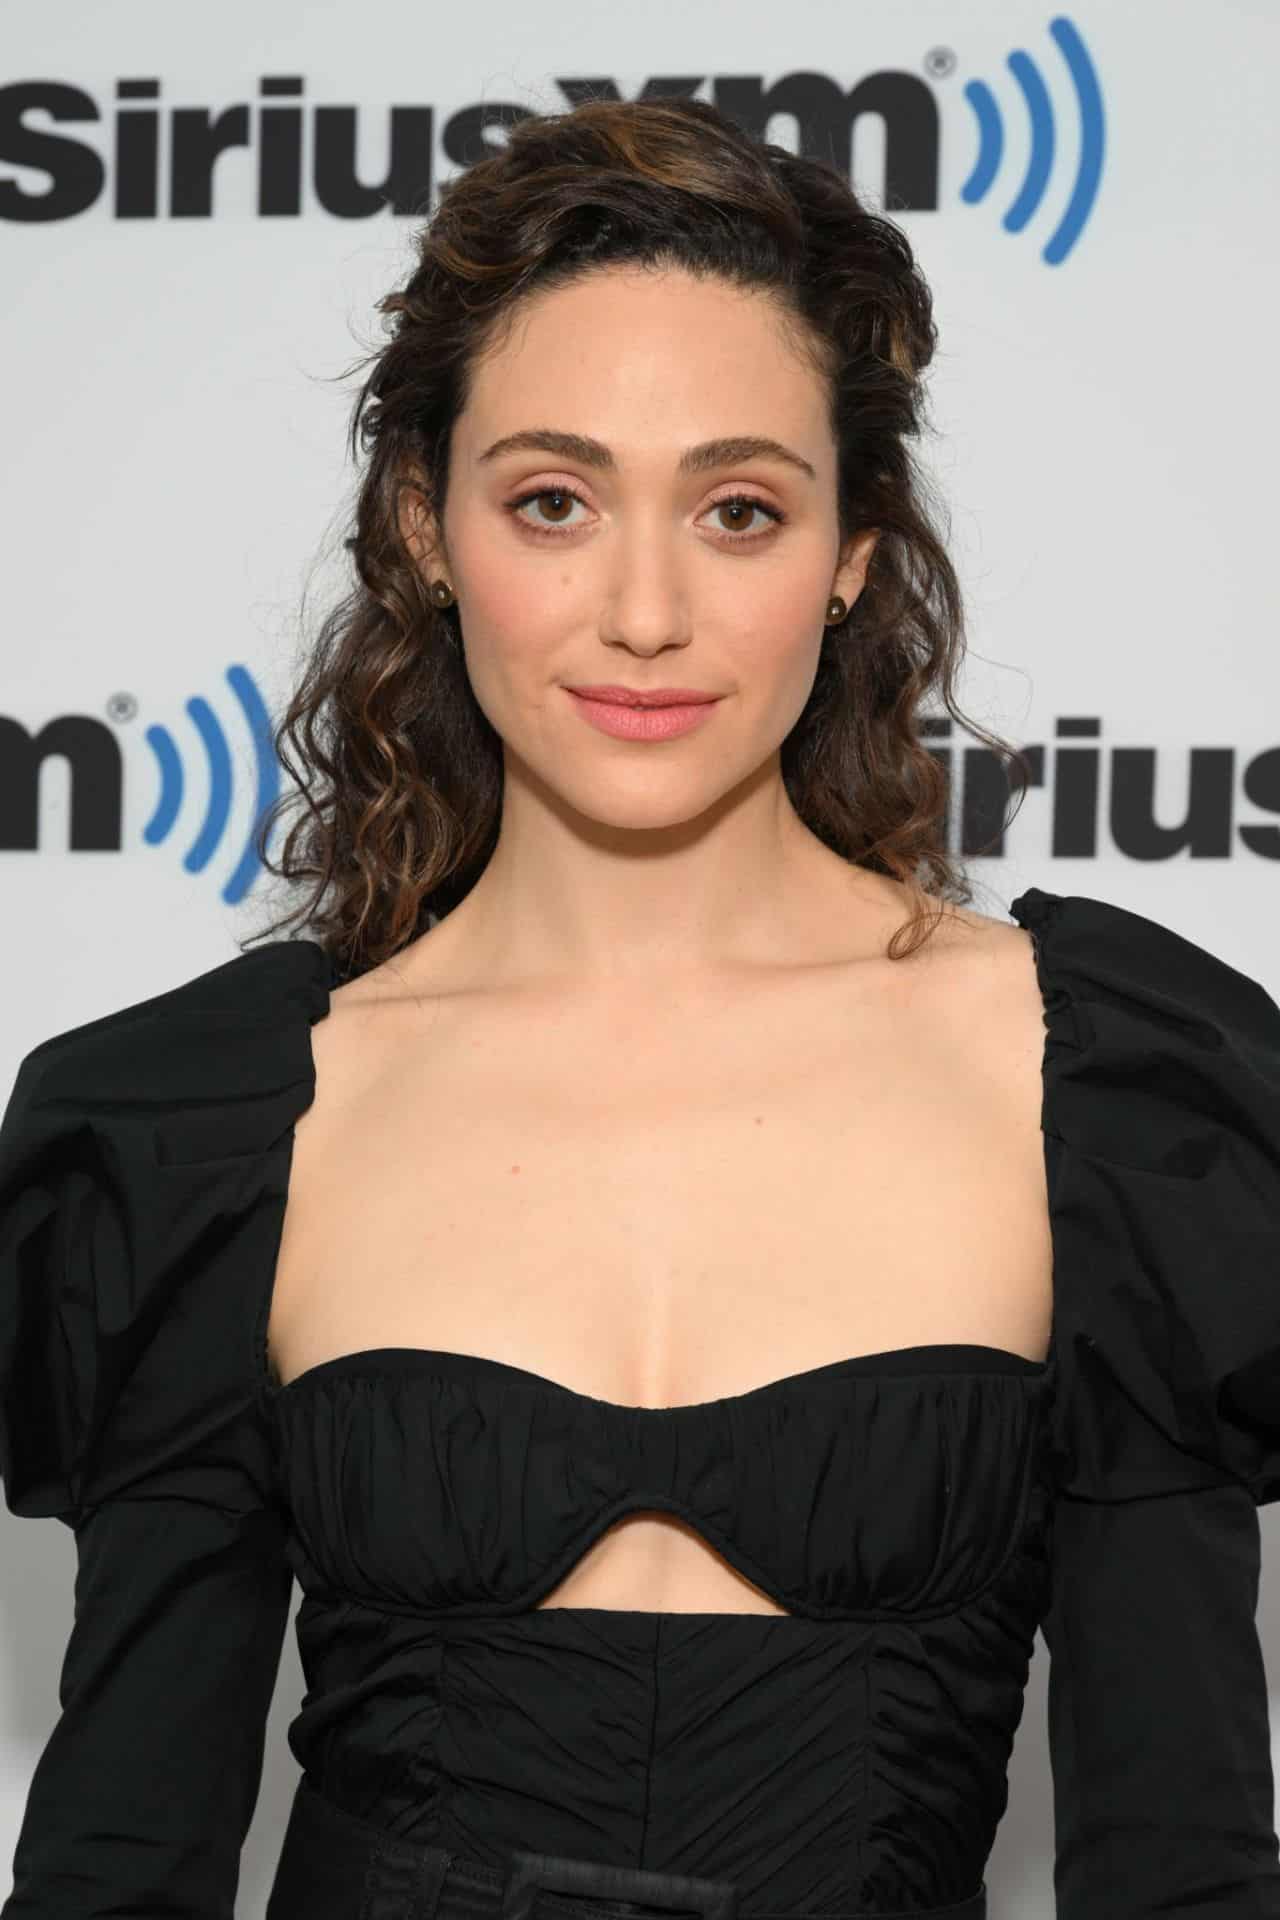 Emmy Rossum Looks Chic at the "Angelyne" Photocall at SiriusXM Studio in NY